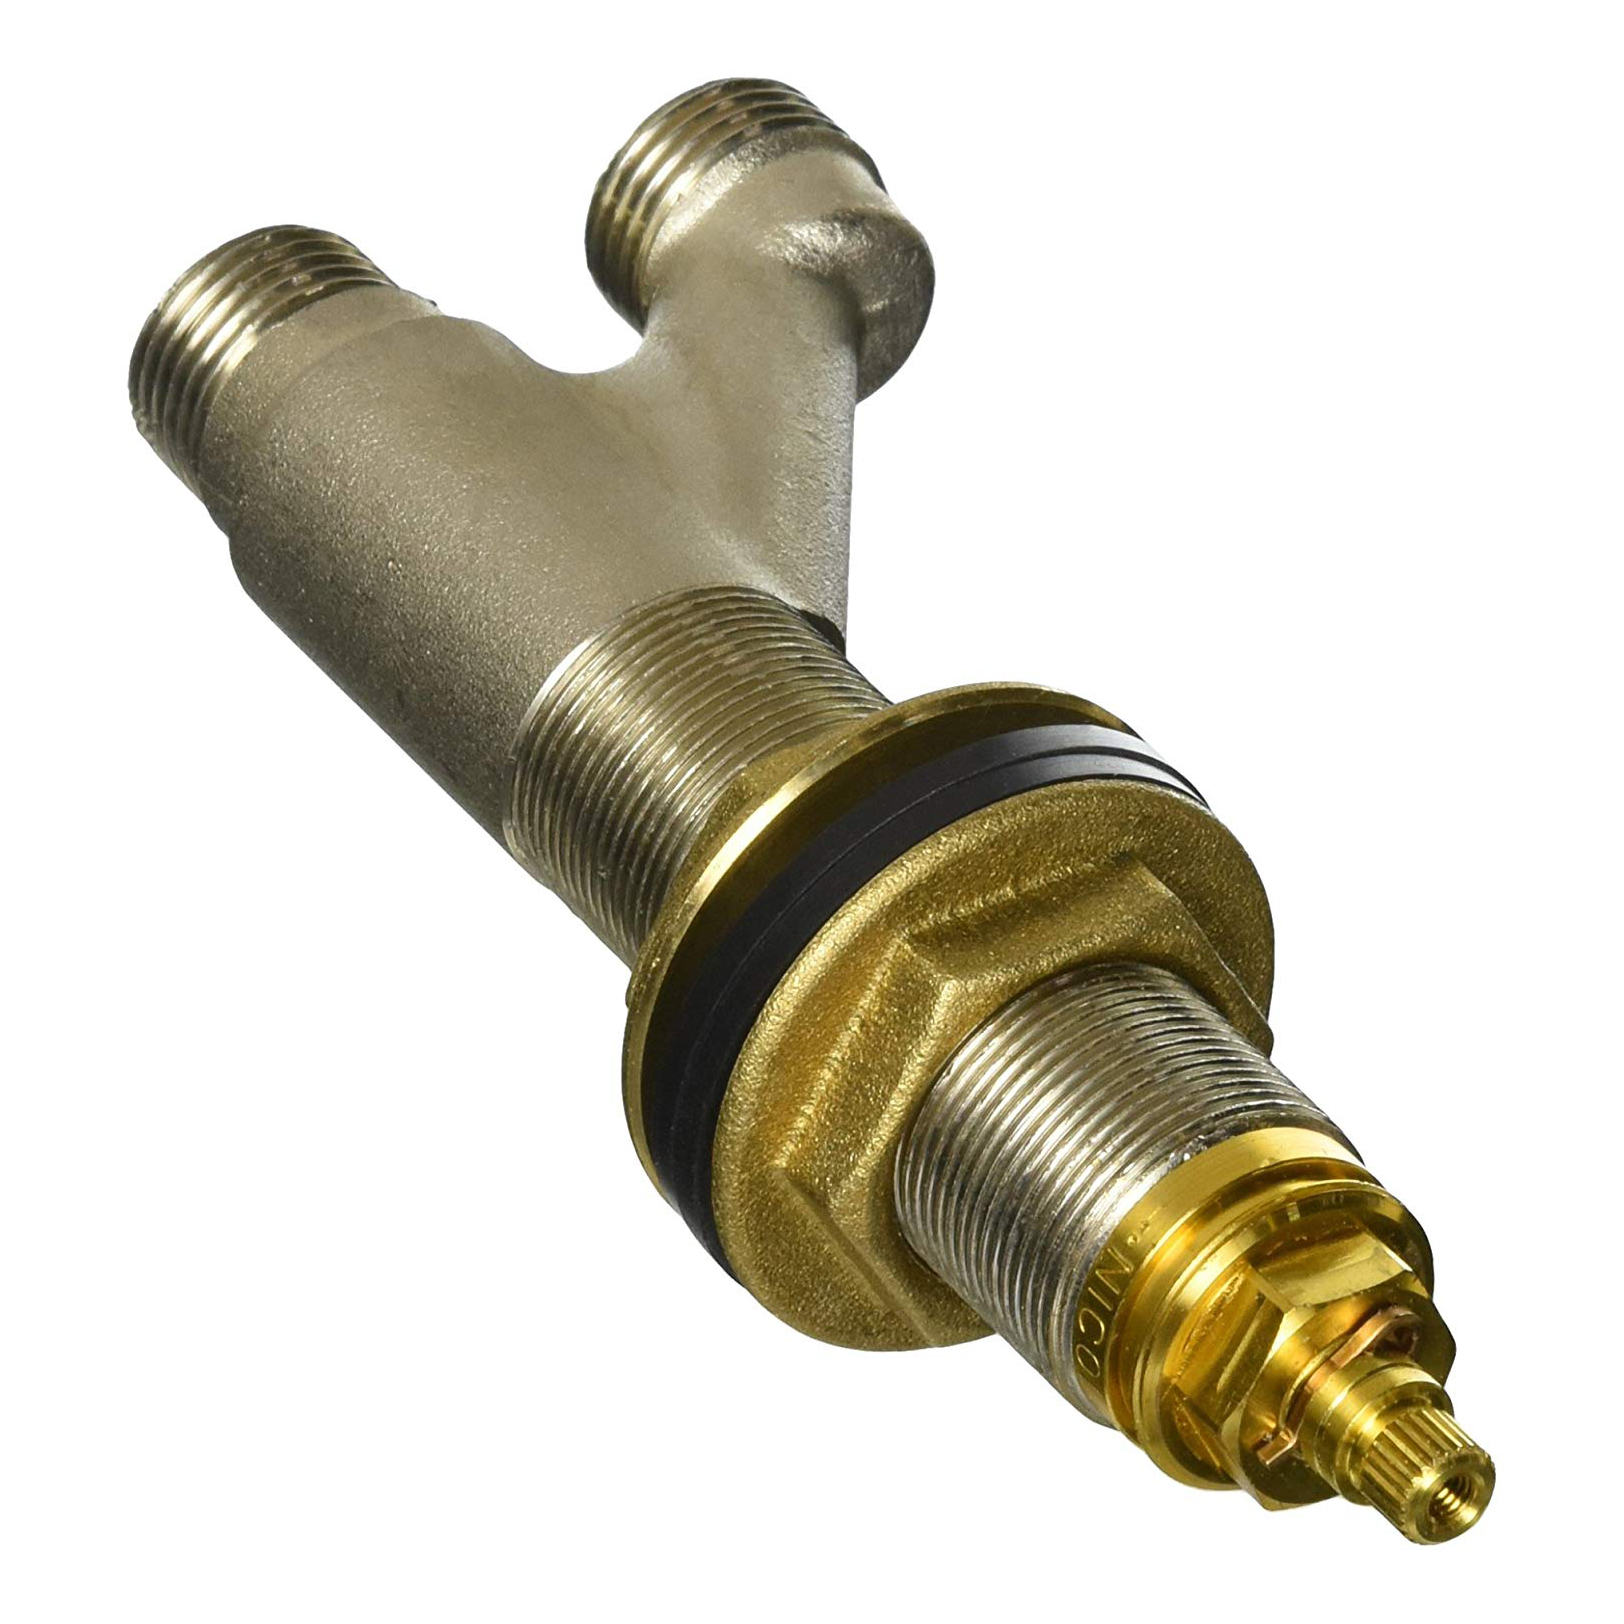 Side Valve Rough-in 1/2" for Lav Faucet Left/Hot Handle